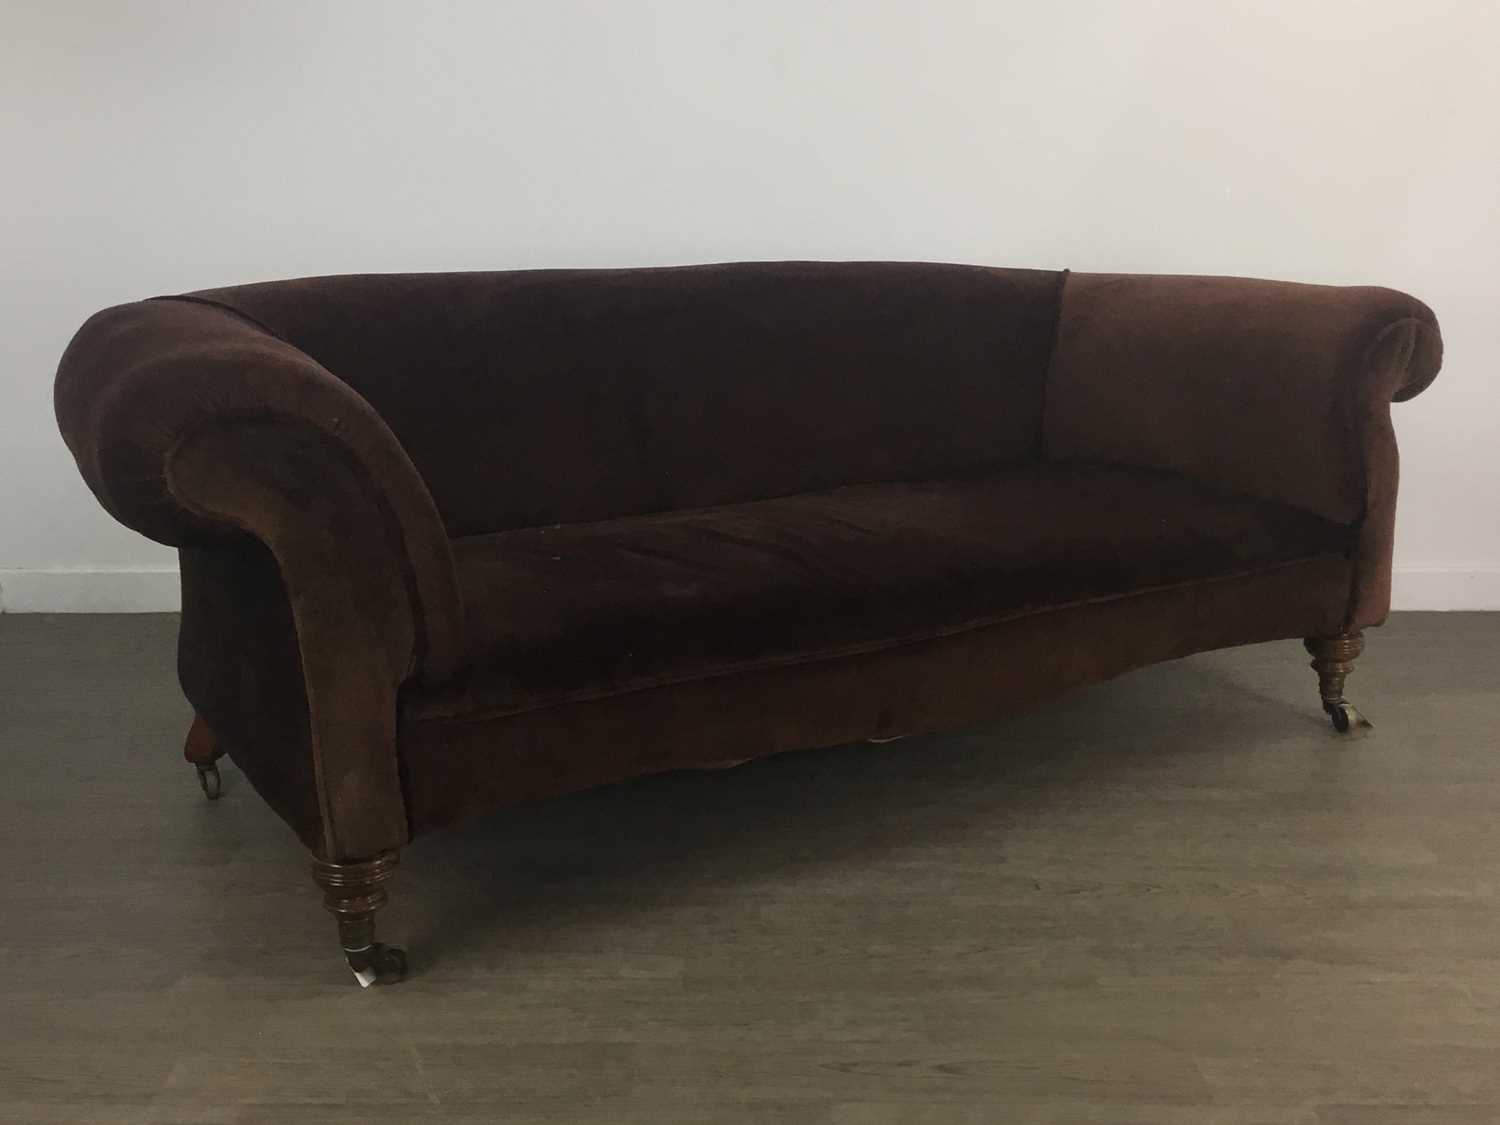 HOWARD & SONS, CHESTERFIELD SETTEE LATE 19TH / EARLY 20TH CENTURY